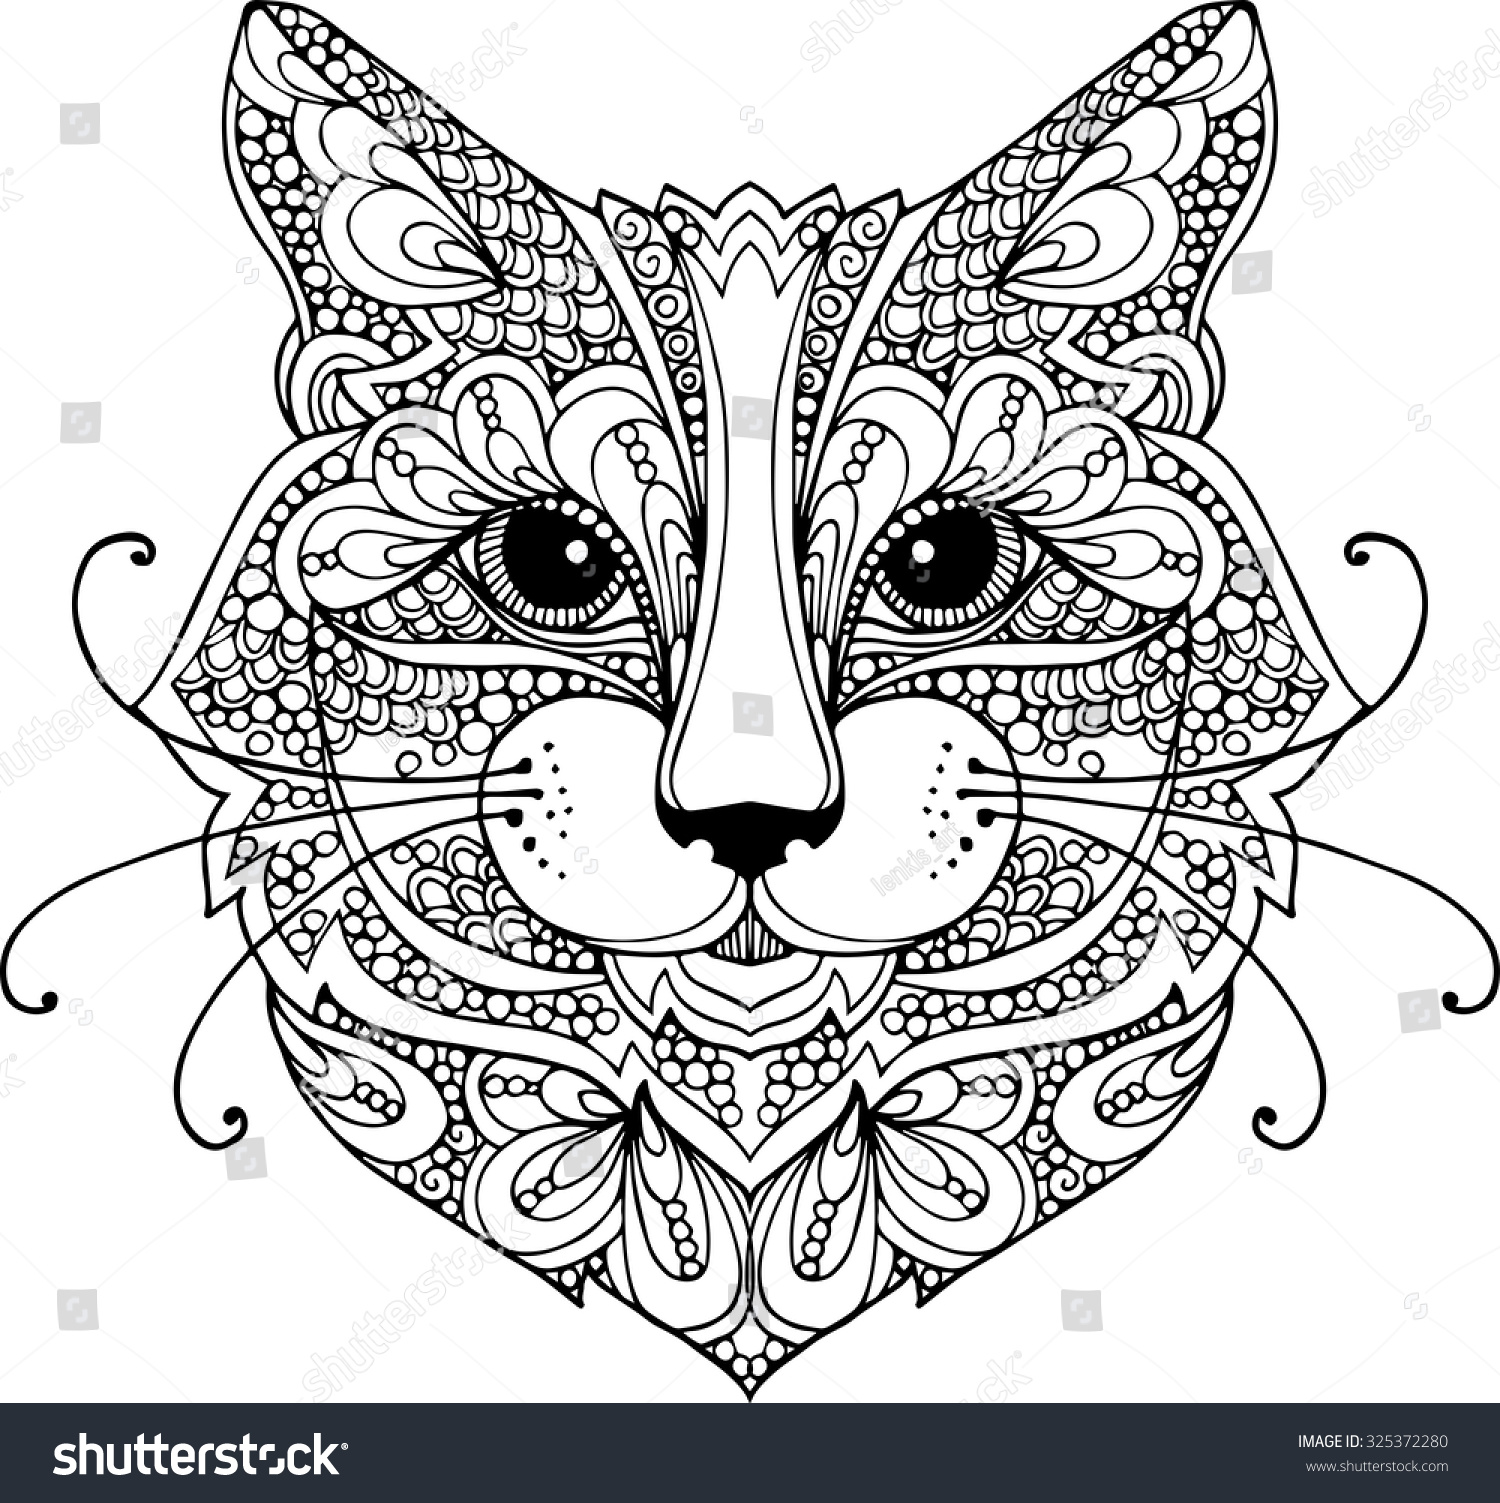 Hand Drawn Outline Doodle Illustration Cat Stock Vector 325372280